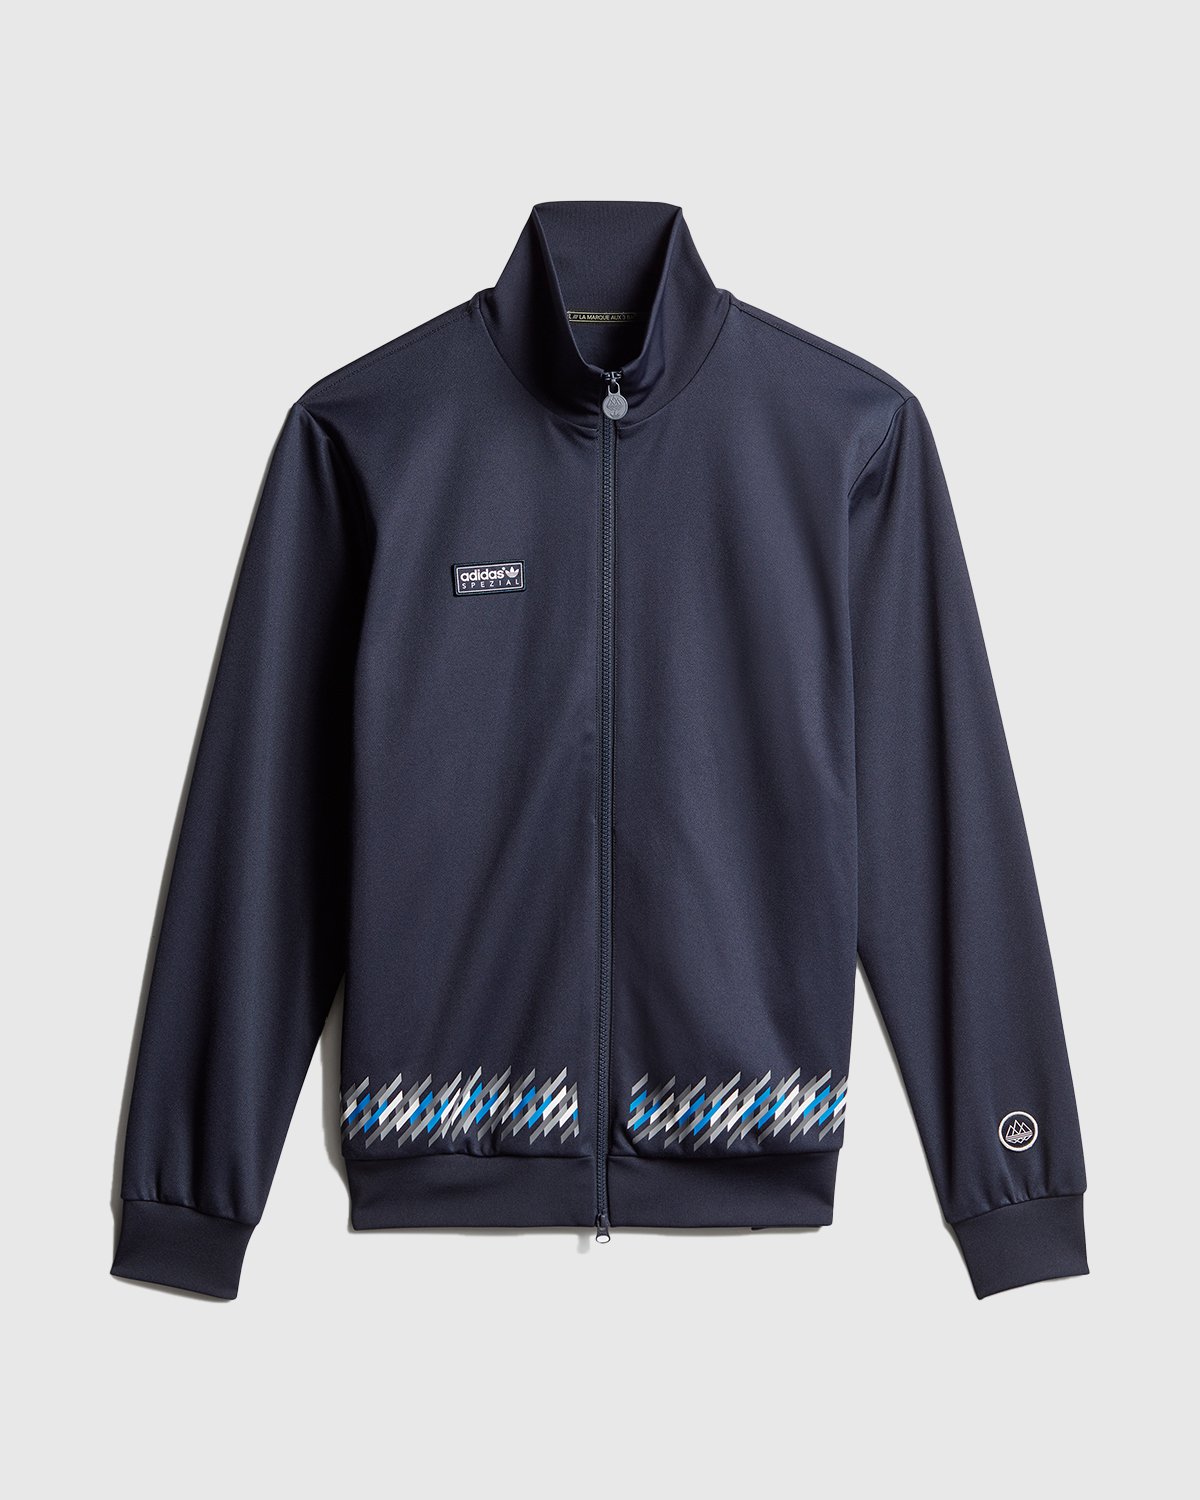 Adidas - Track Top Spezial x New Order Navy - Clothing - Blue - Image 1